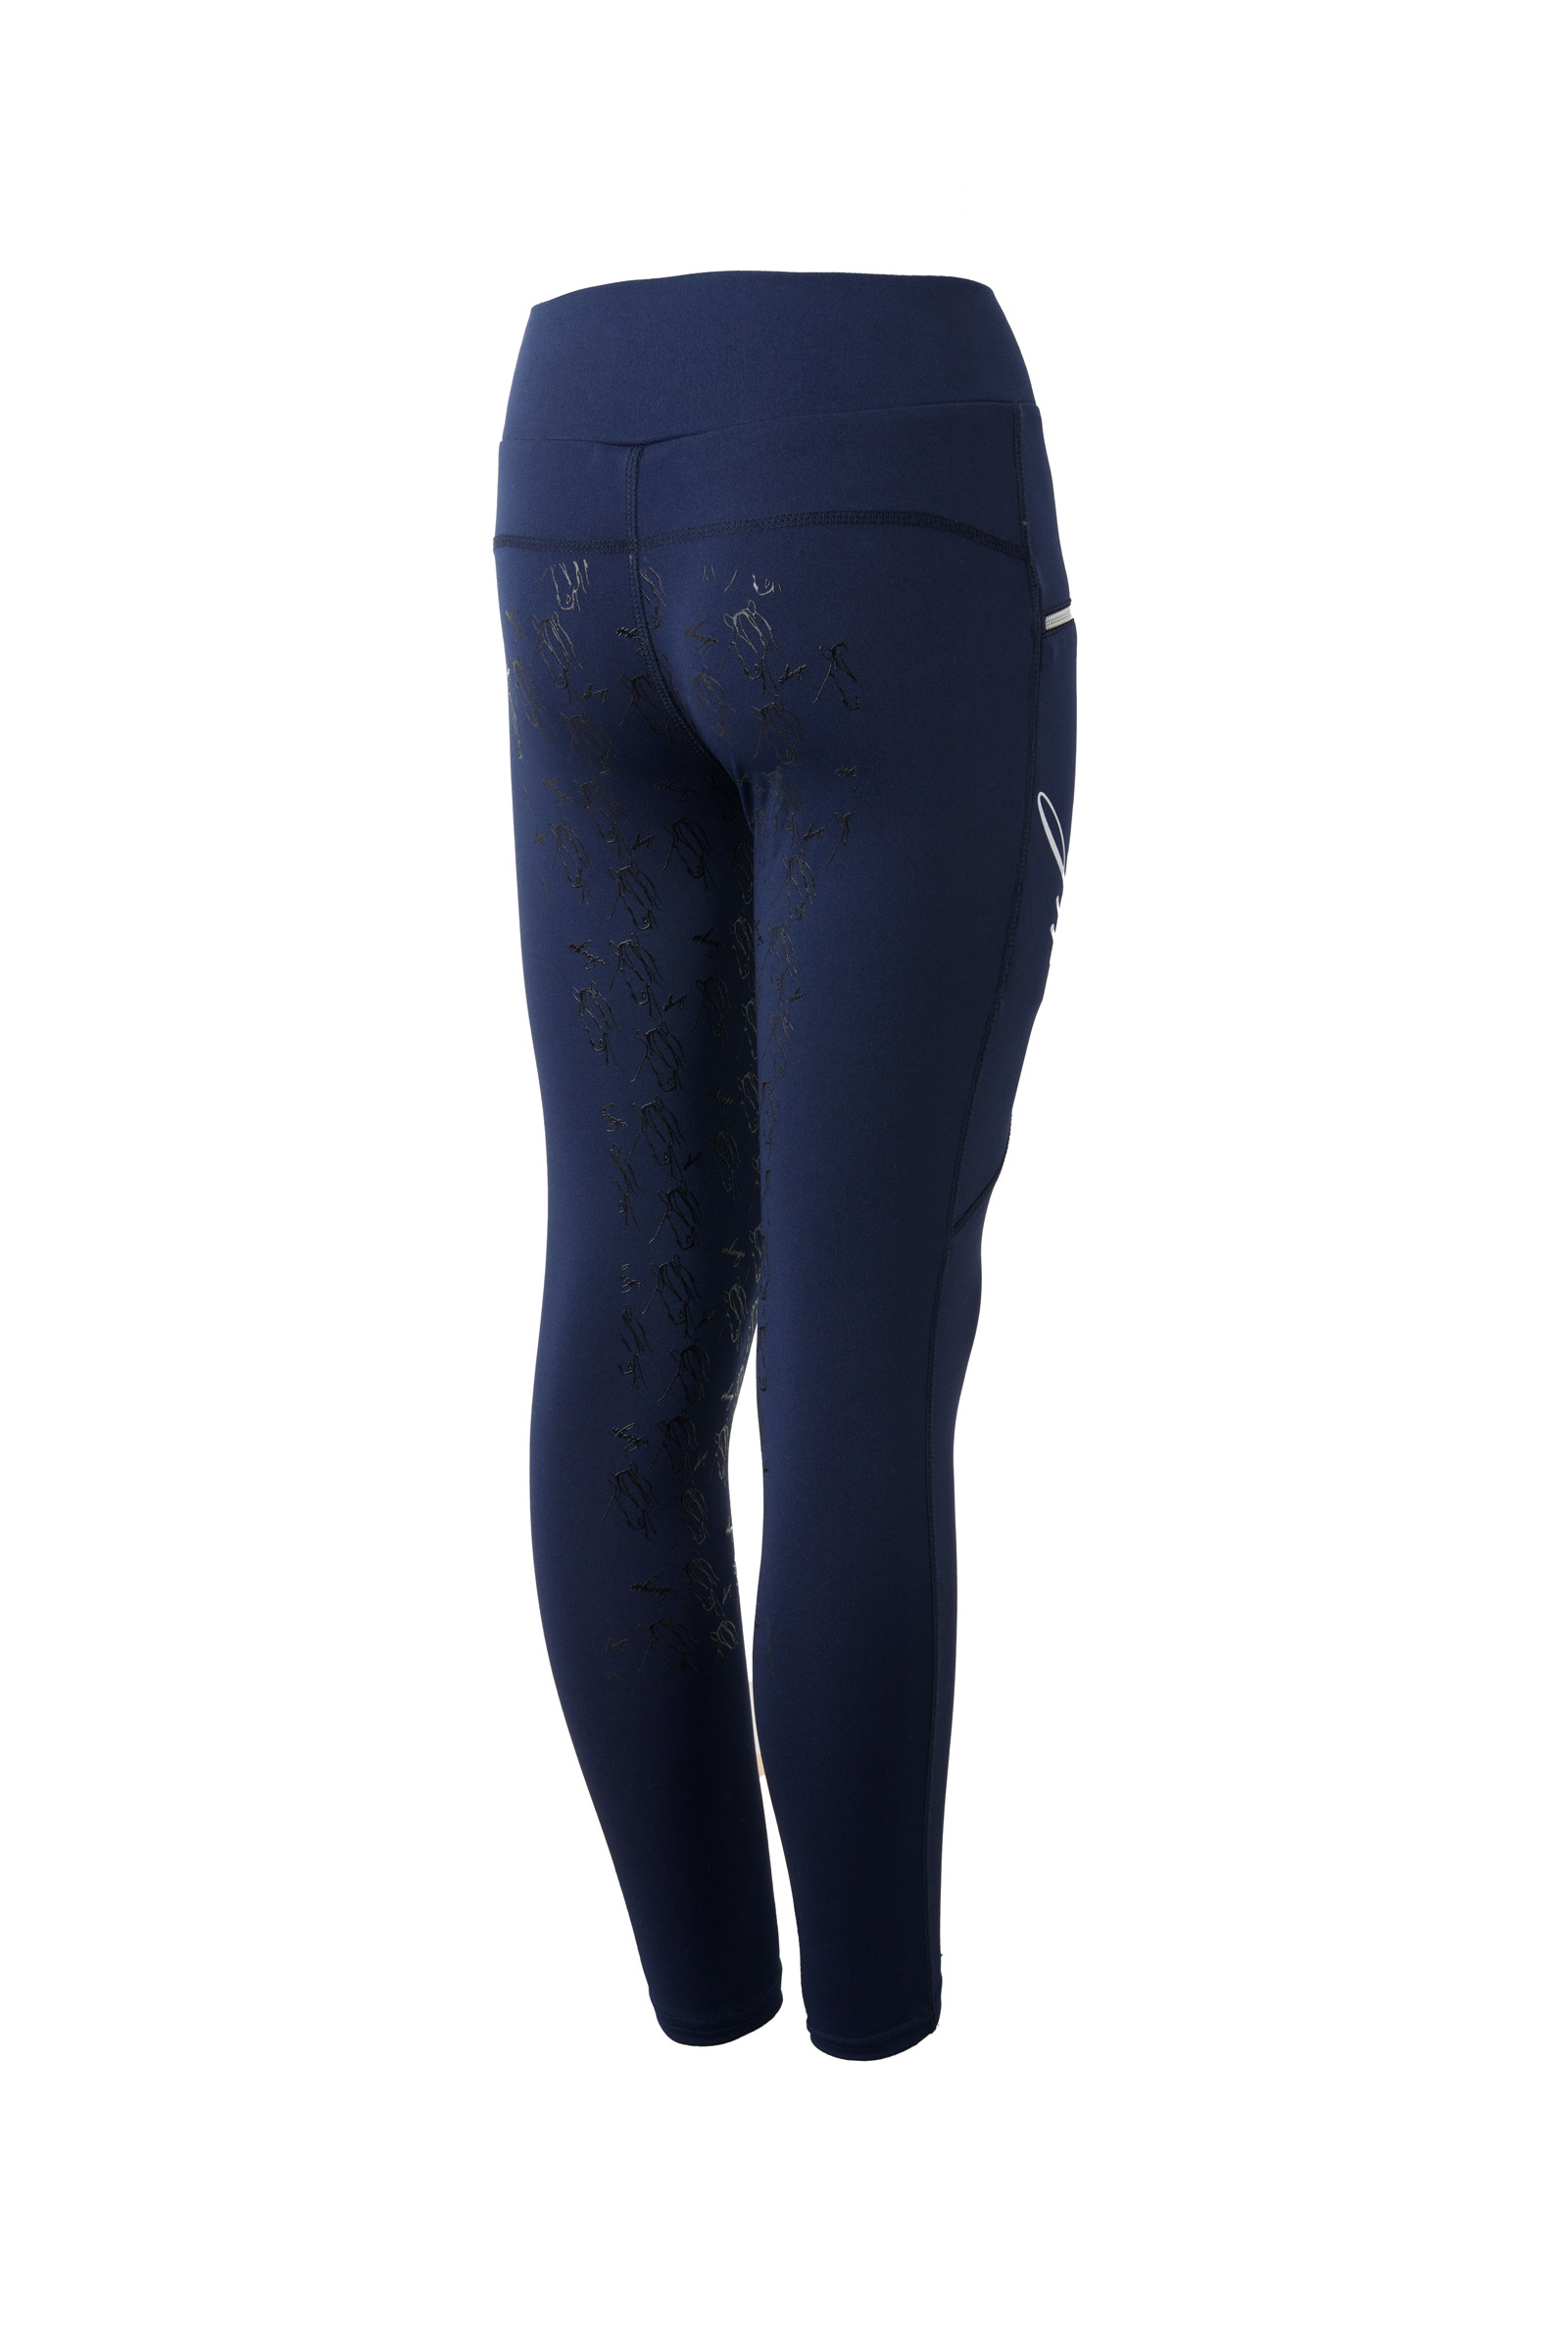 Covalliero Childrens Riding Tights